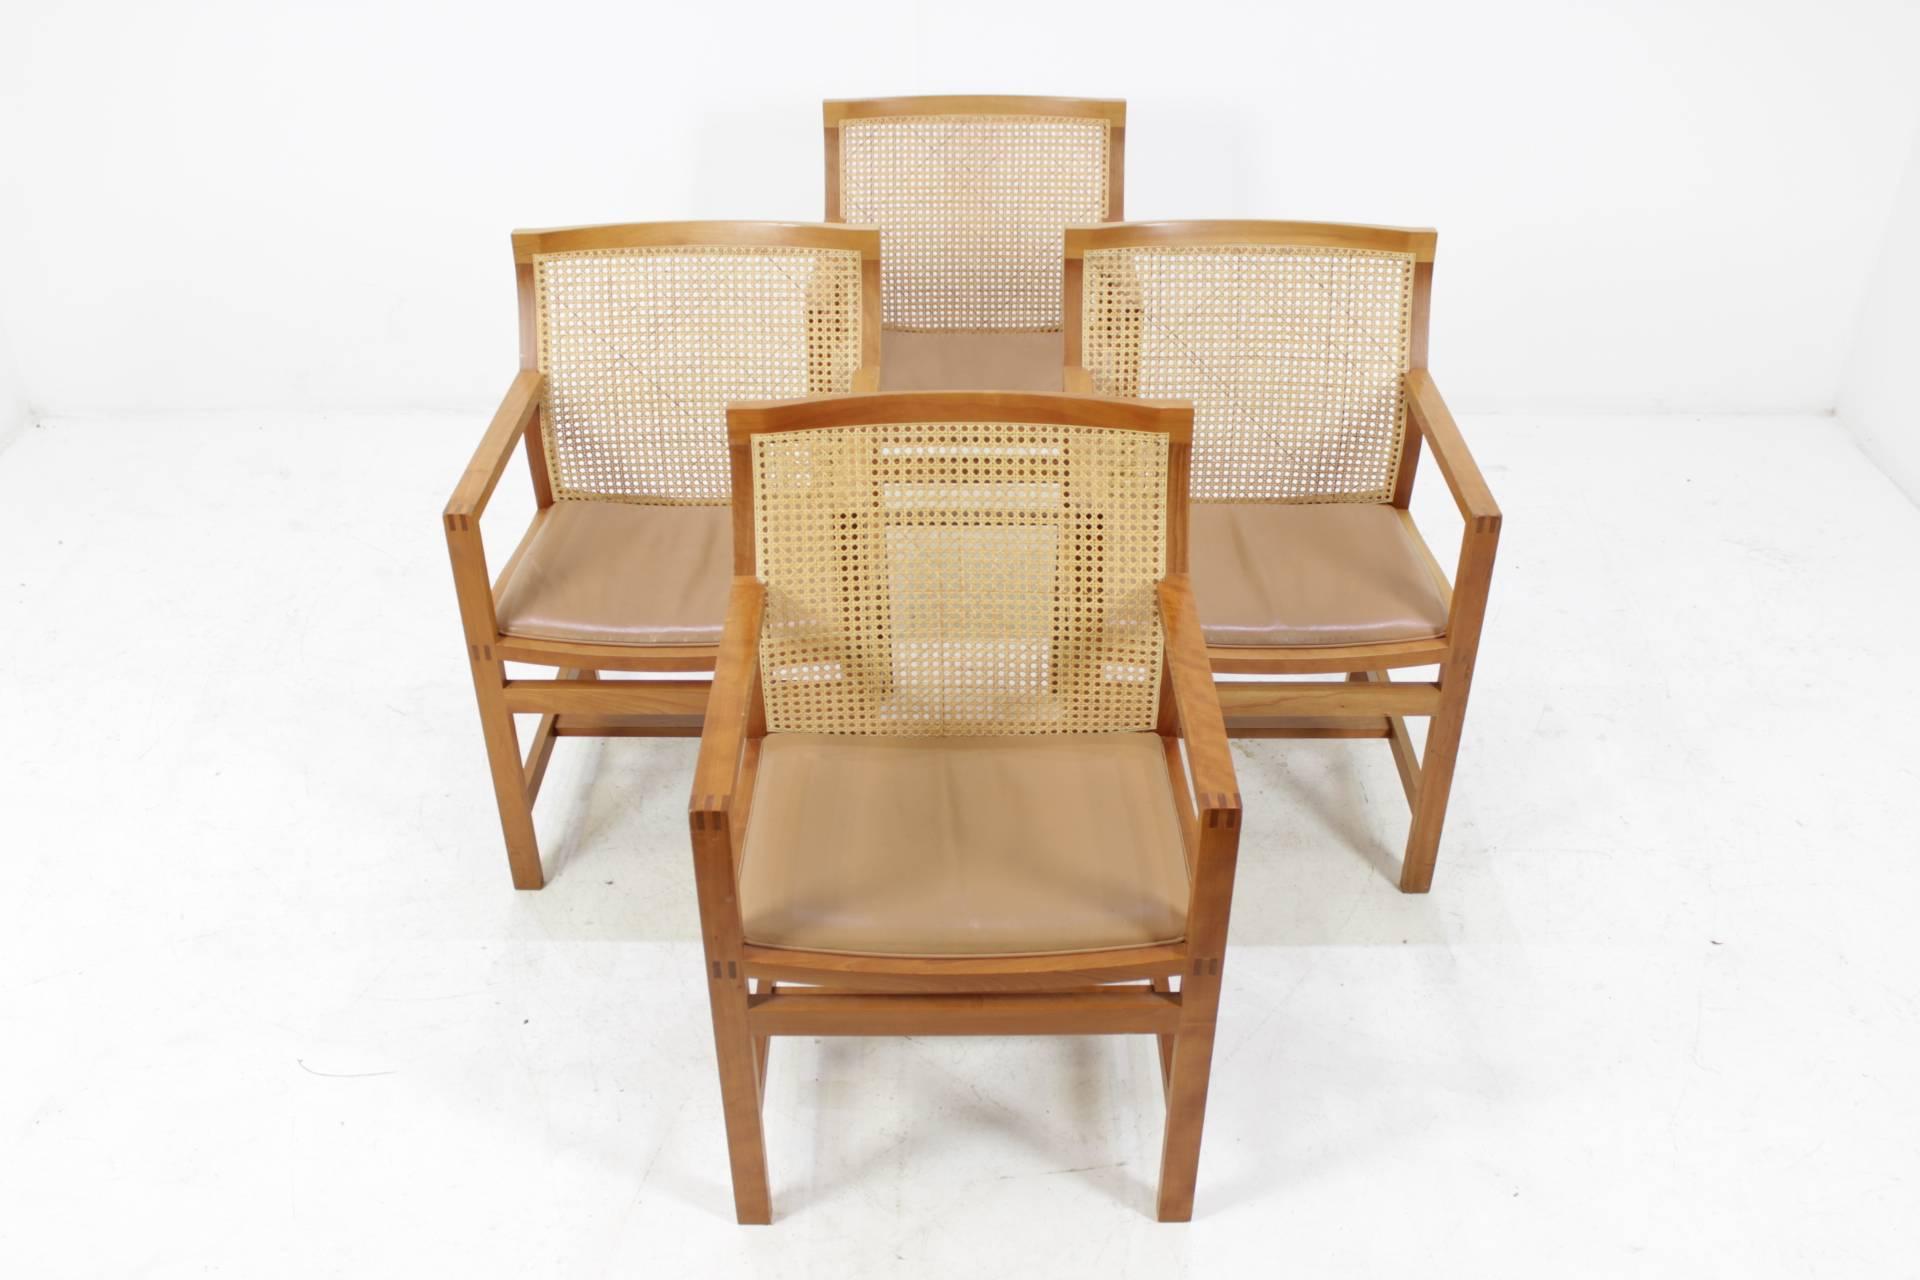 The chairs (model 7512) are in good original condition and ready to be used. Material: Stained oak, leather, cane.